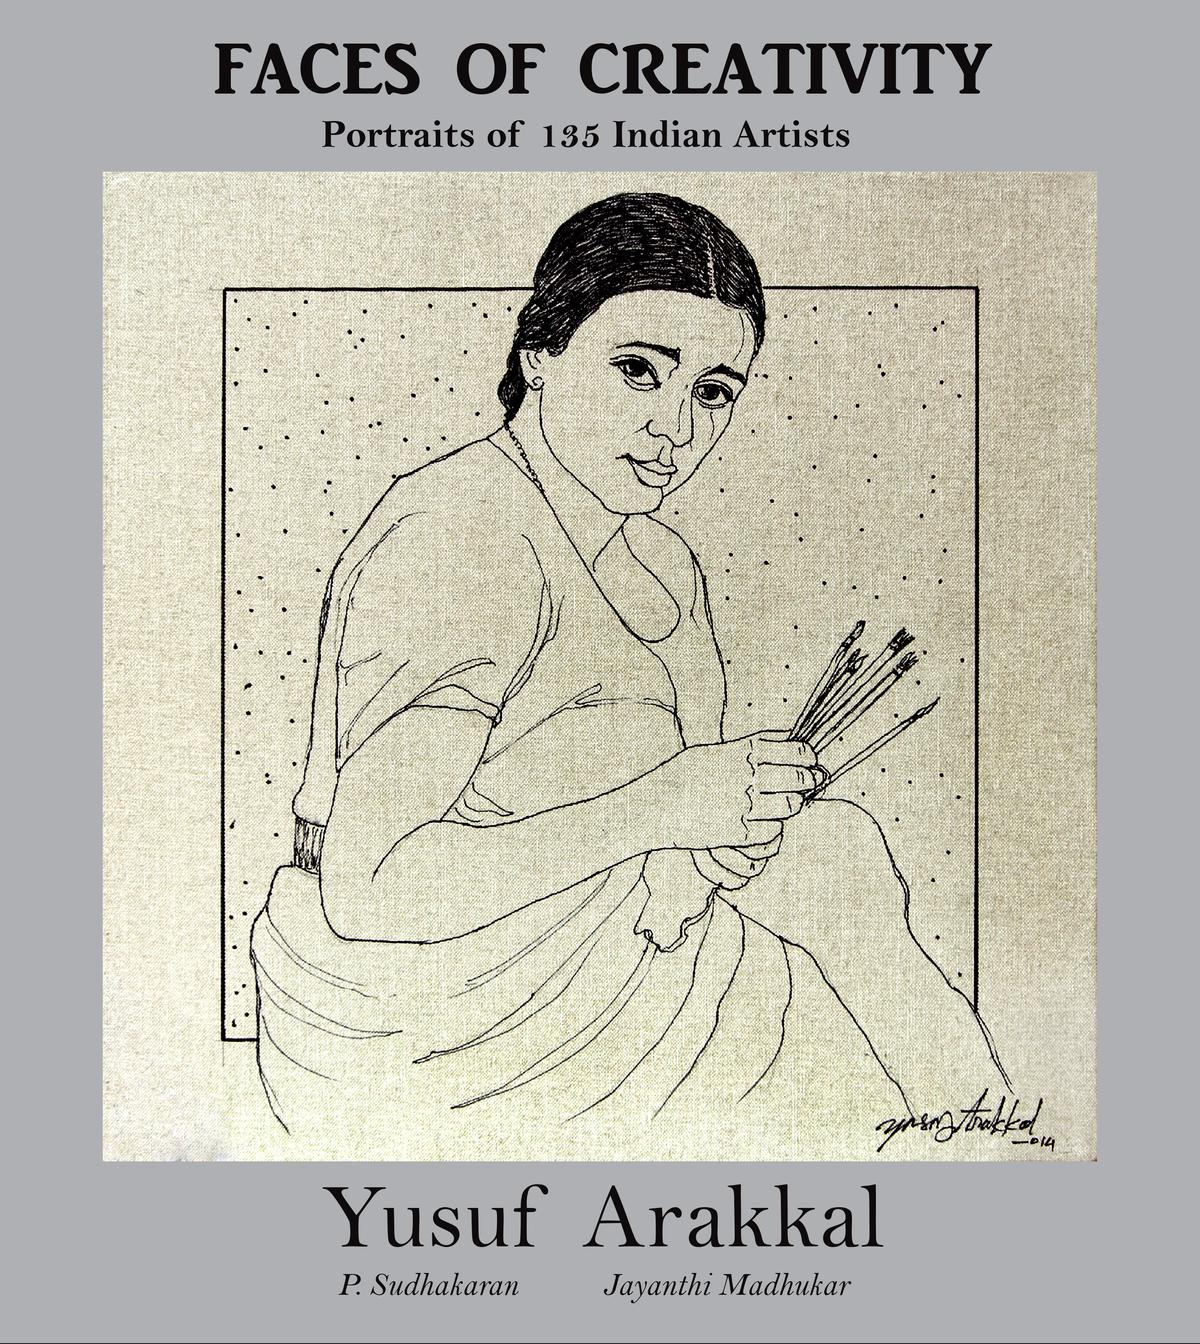 Faces of Creativity, a collection of pen-and-ink sketches by Yusuf Arakkal